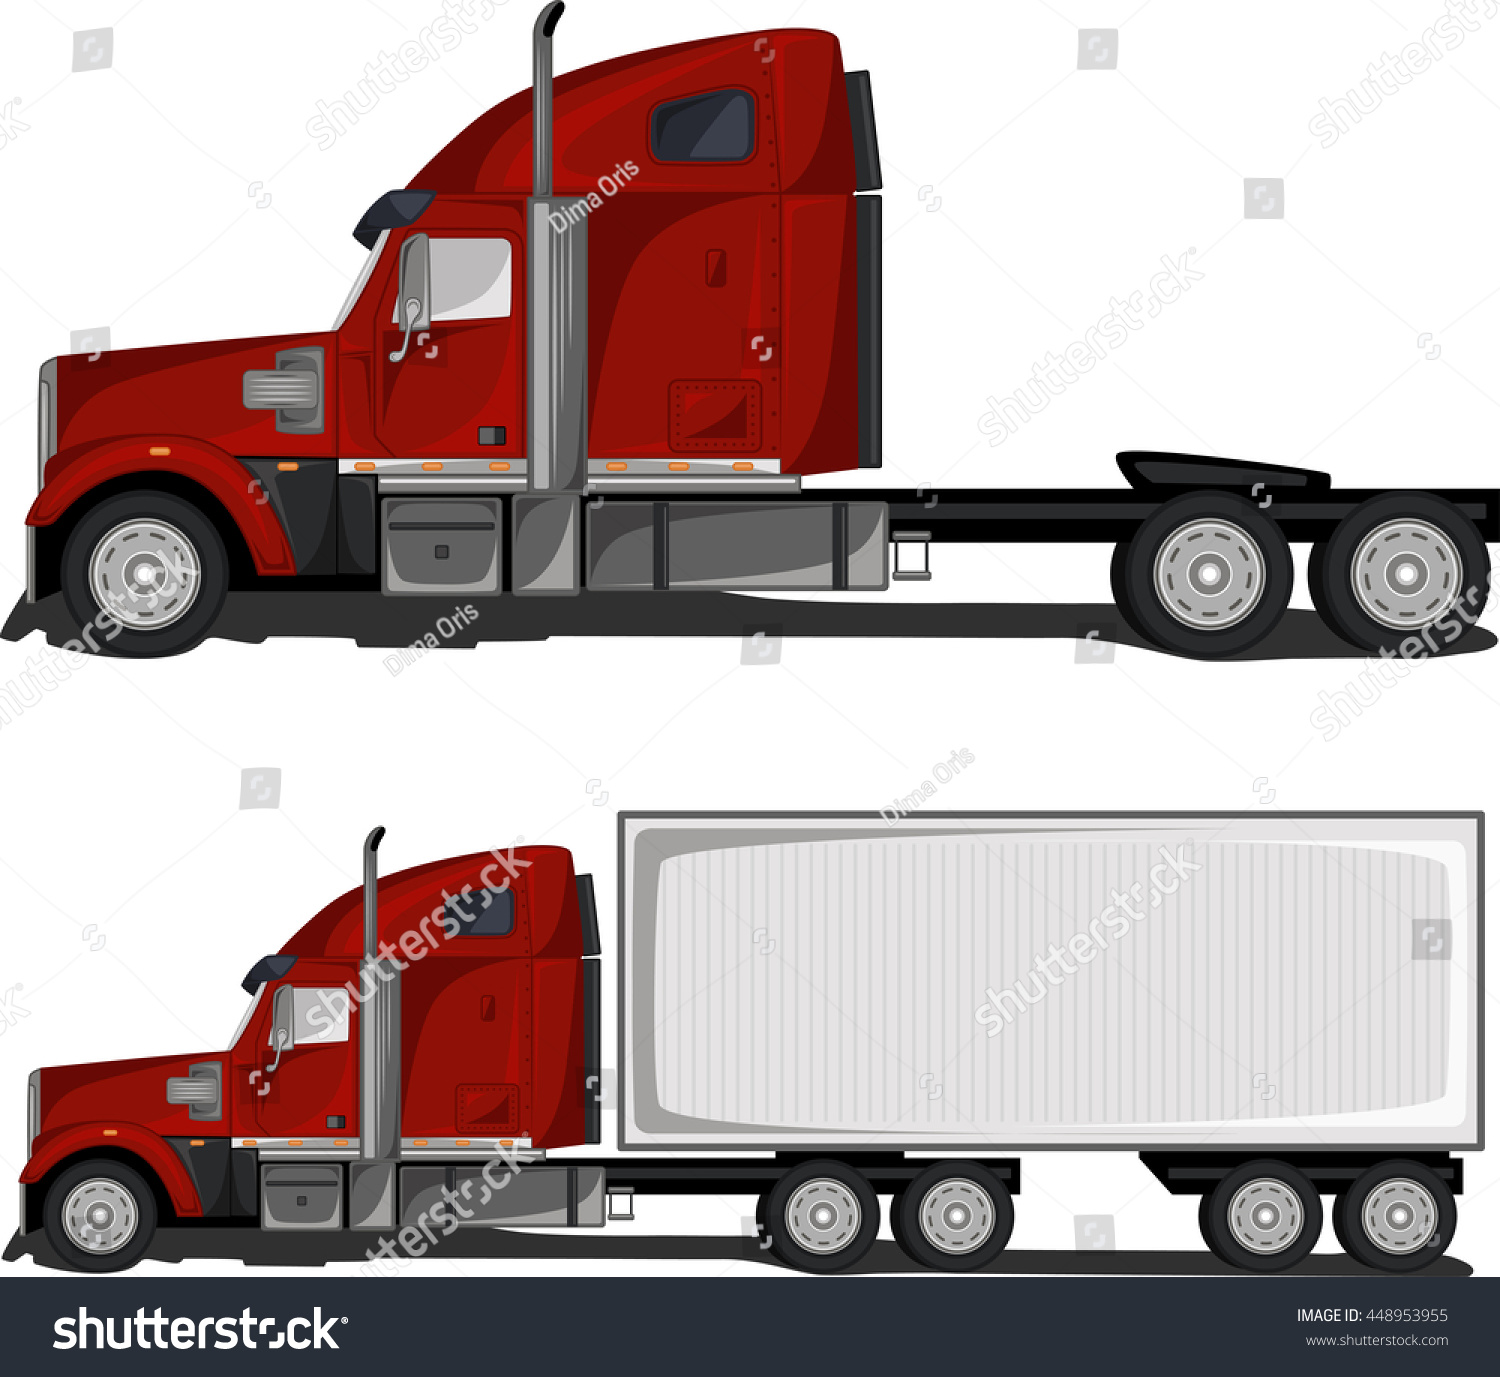 Red Truck Trailer Isolated Image On Stock Vector (Royalty Free ...